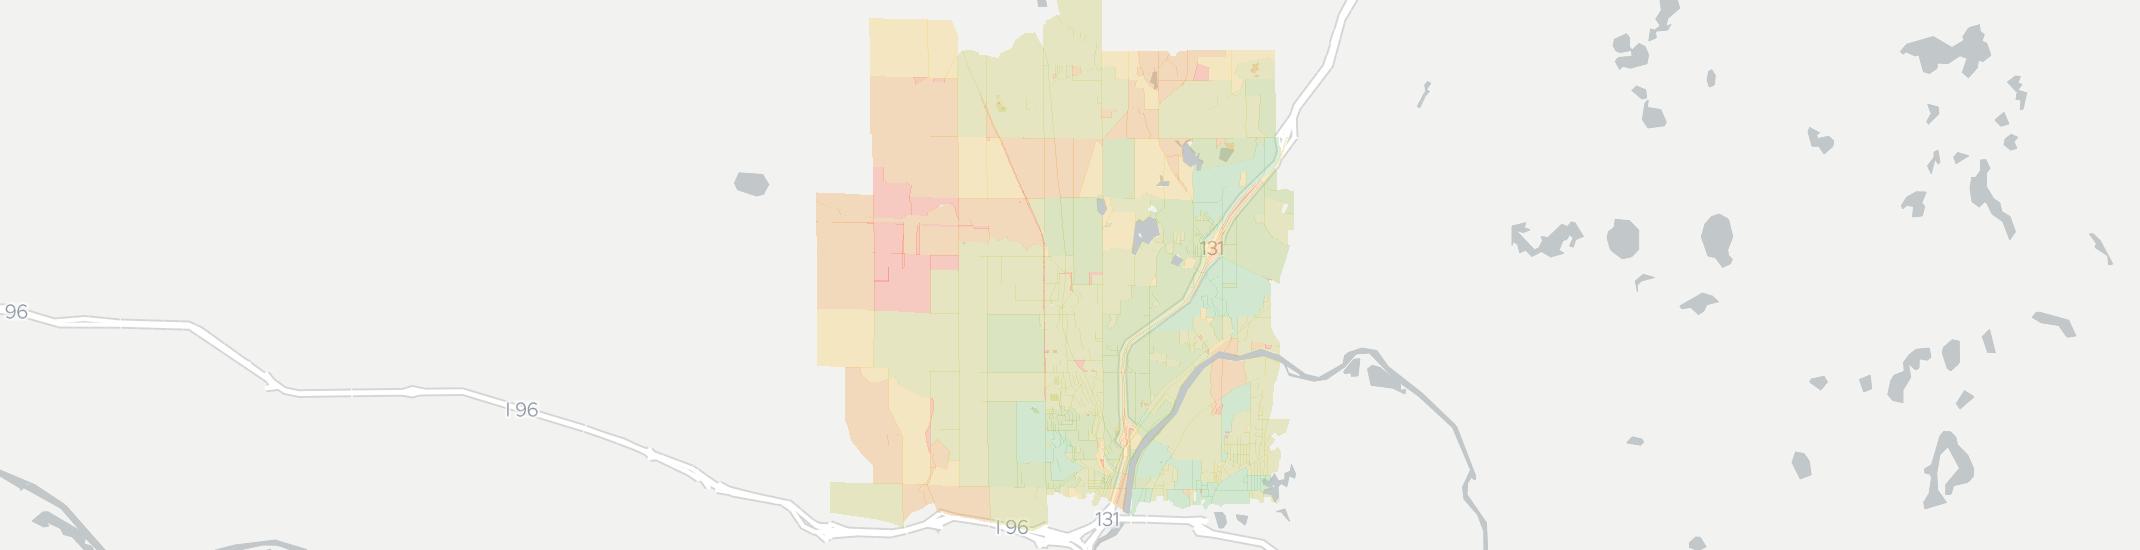 Comstock Park Internet Competition Map. Click for interactive map.